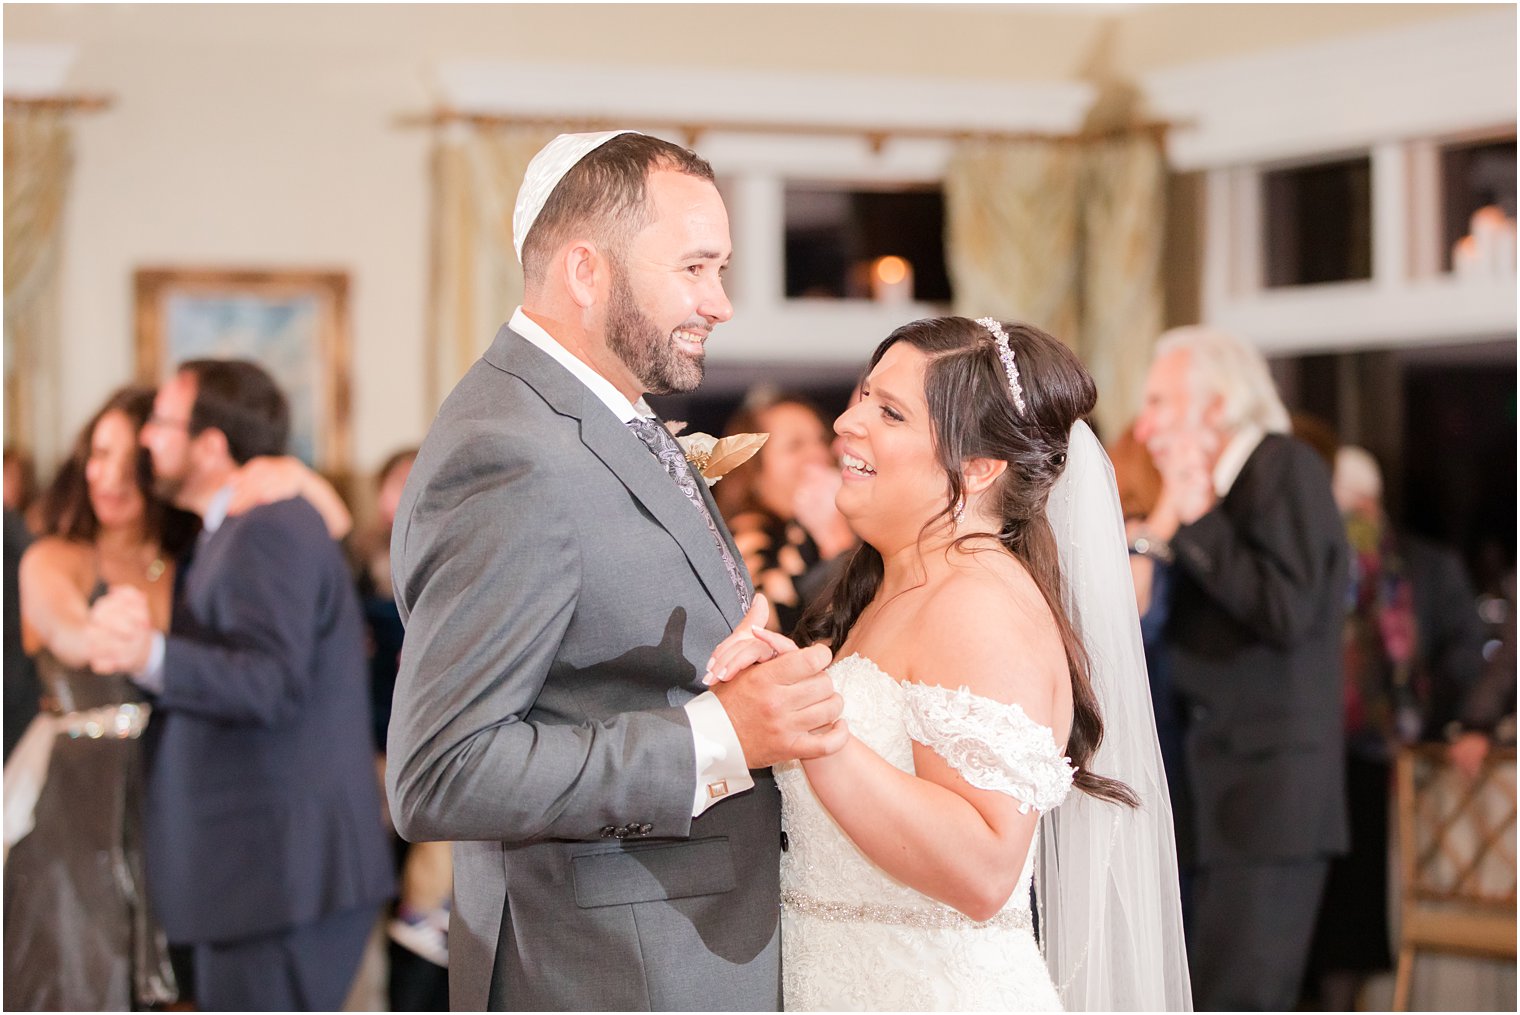 reception dancing at Clarks Landing Yacht Club with Idalia Photography